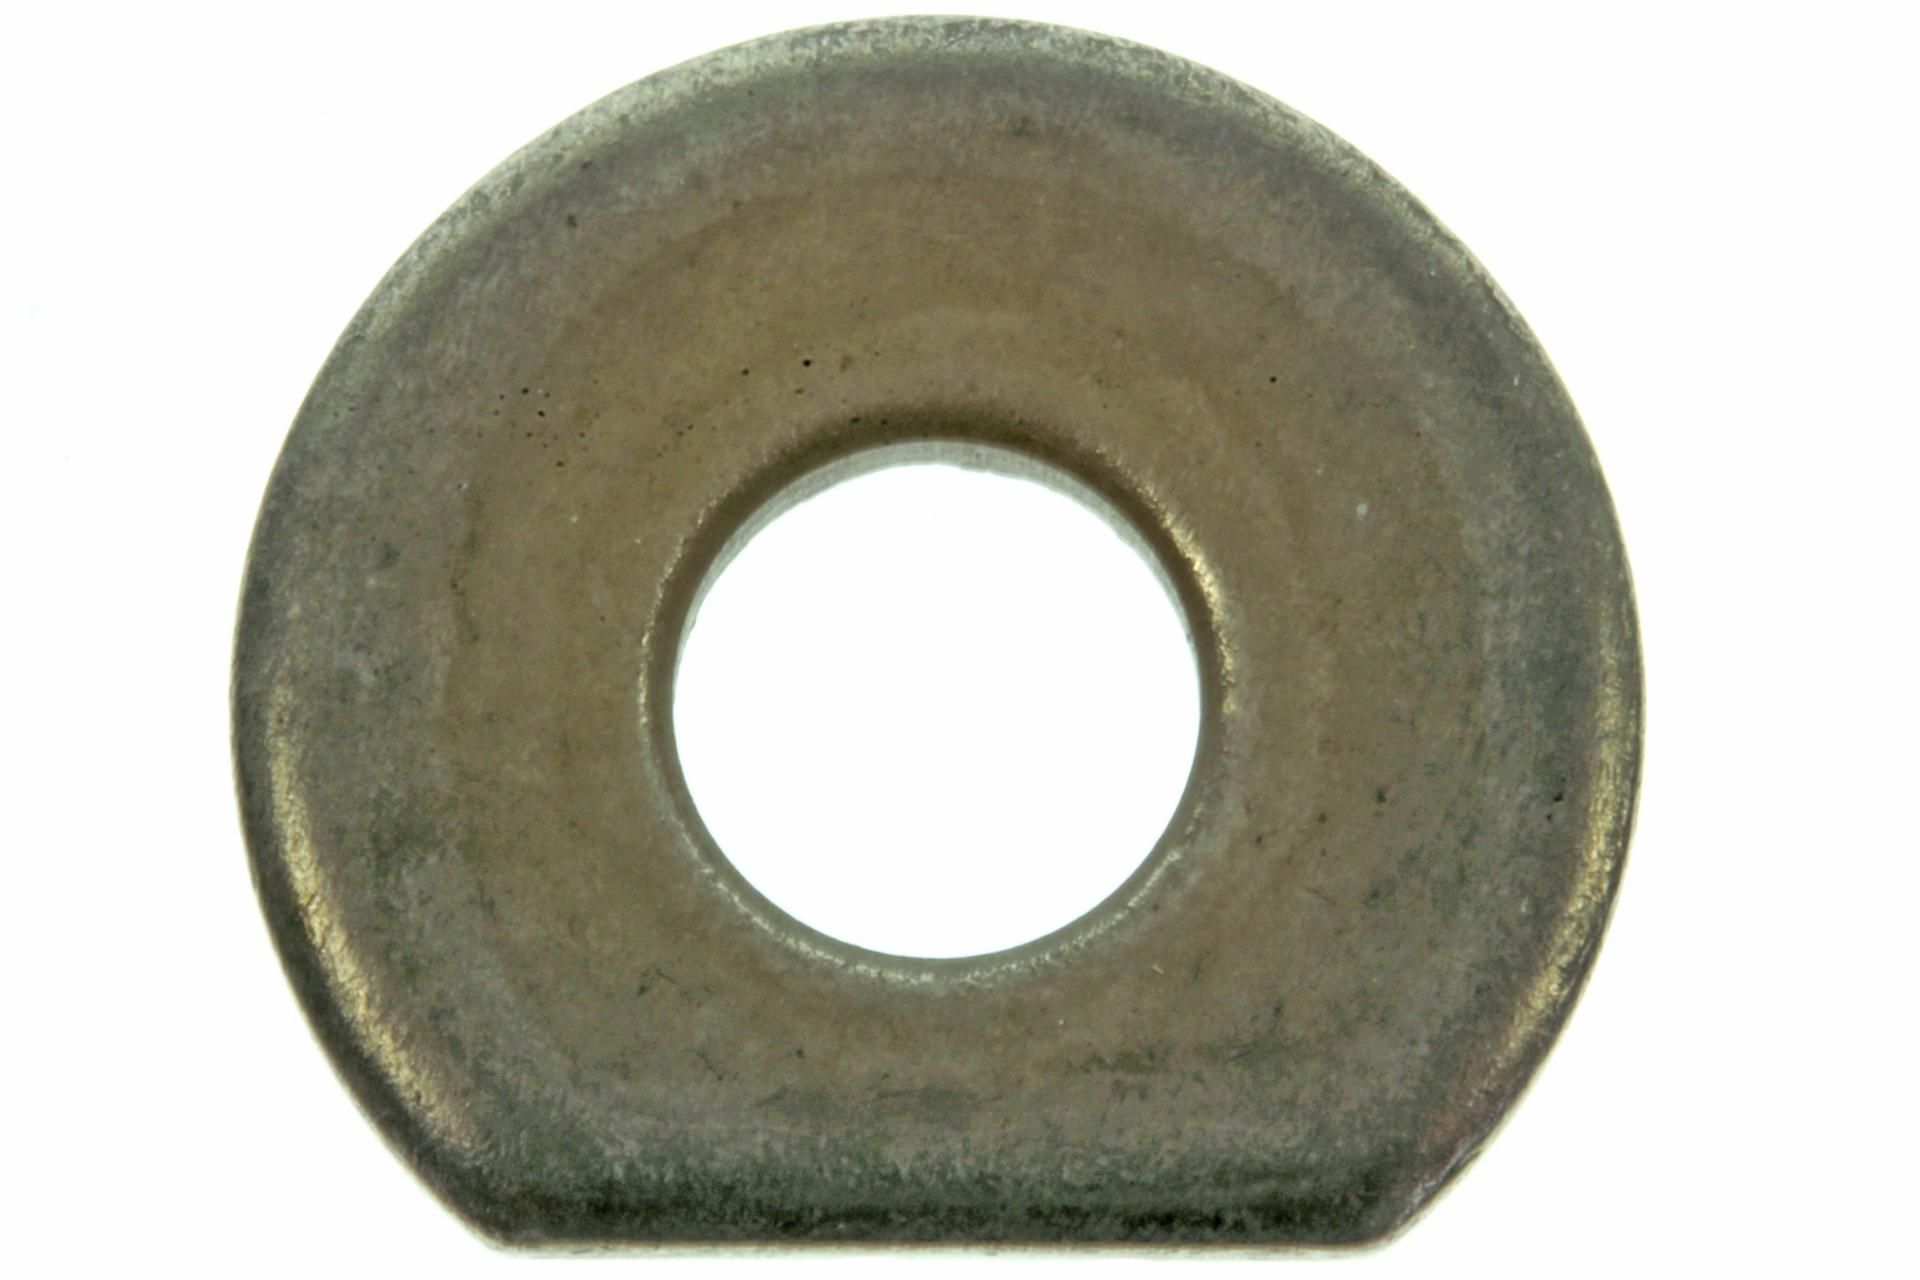 90209-08050-00 WASHER, SPECL SHAP